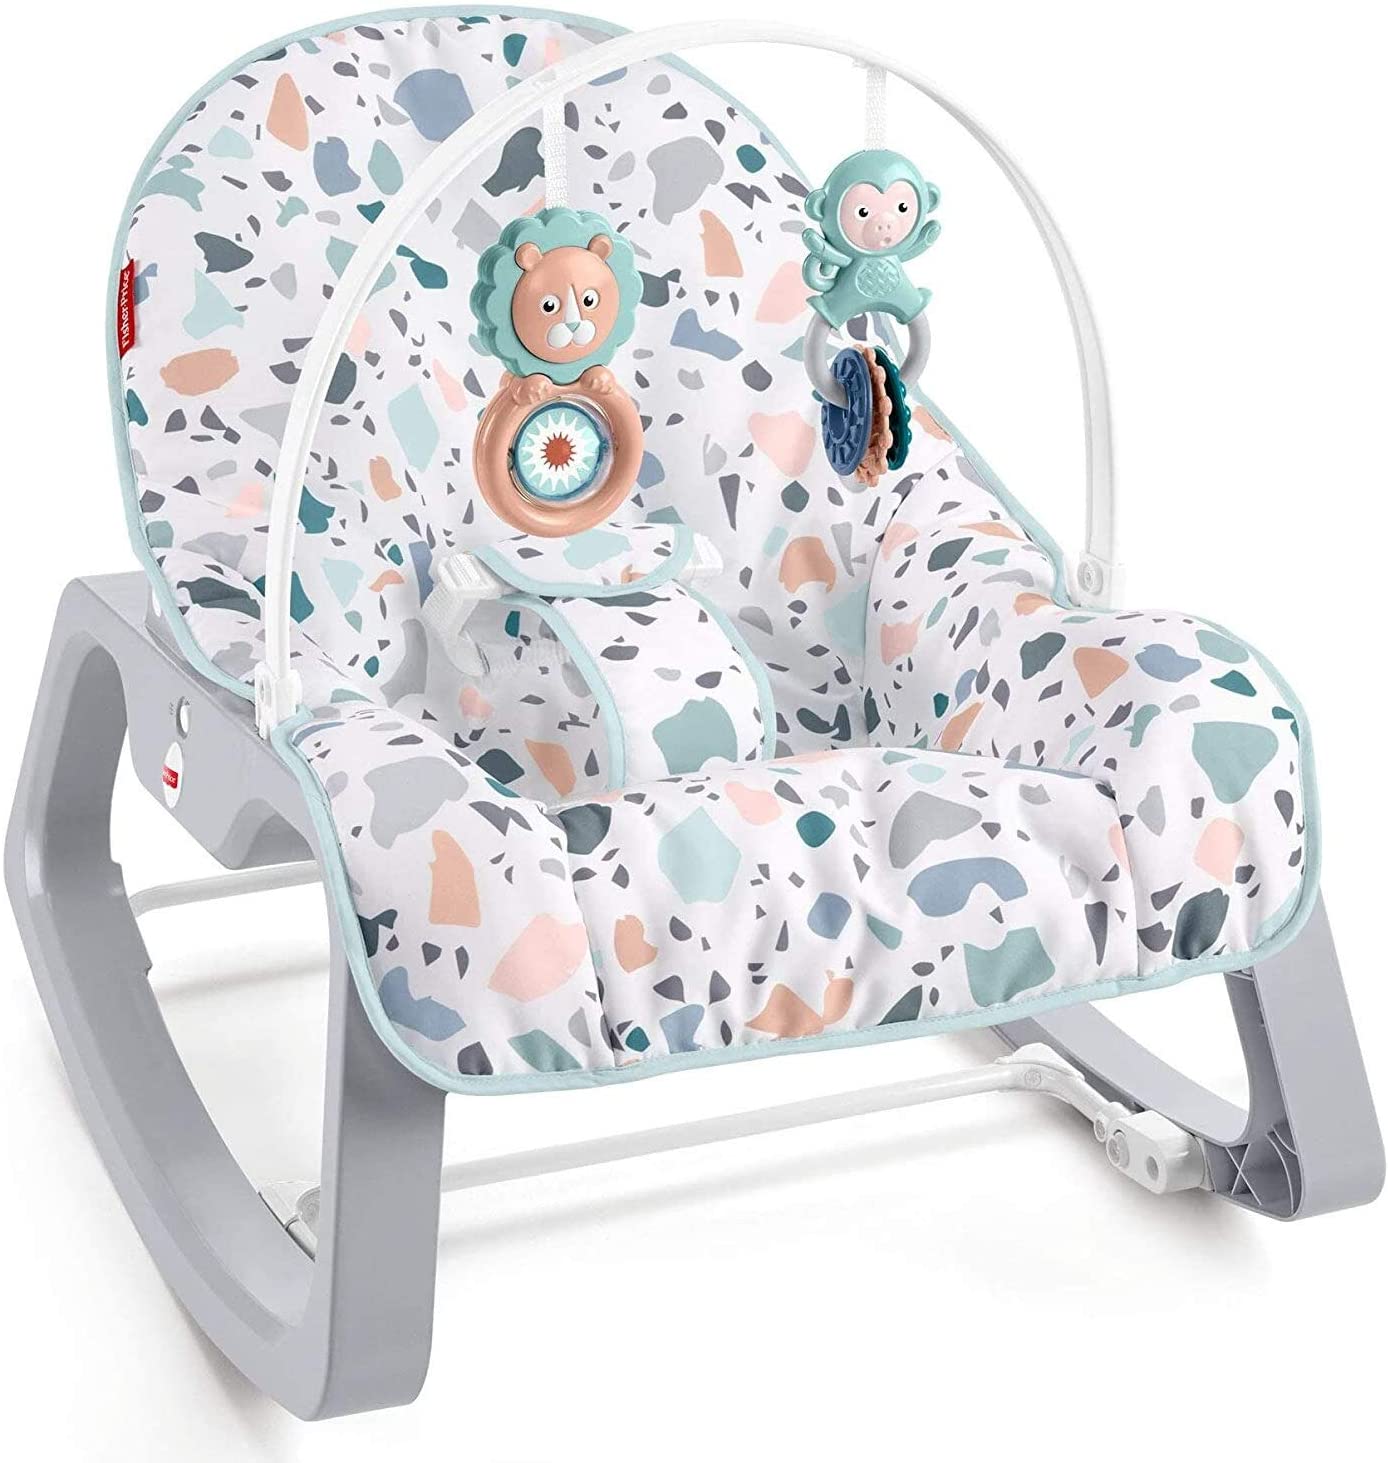 Fisher Price Infant-to-Toddler Rocker - Pacific Pebble